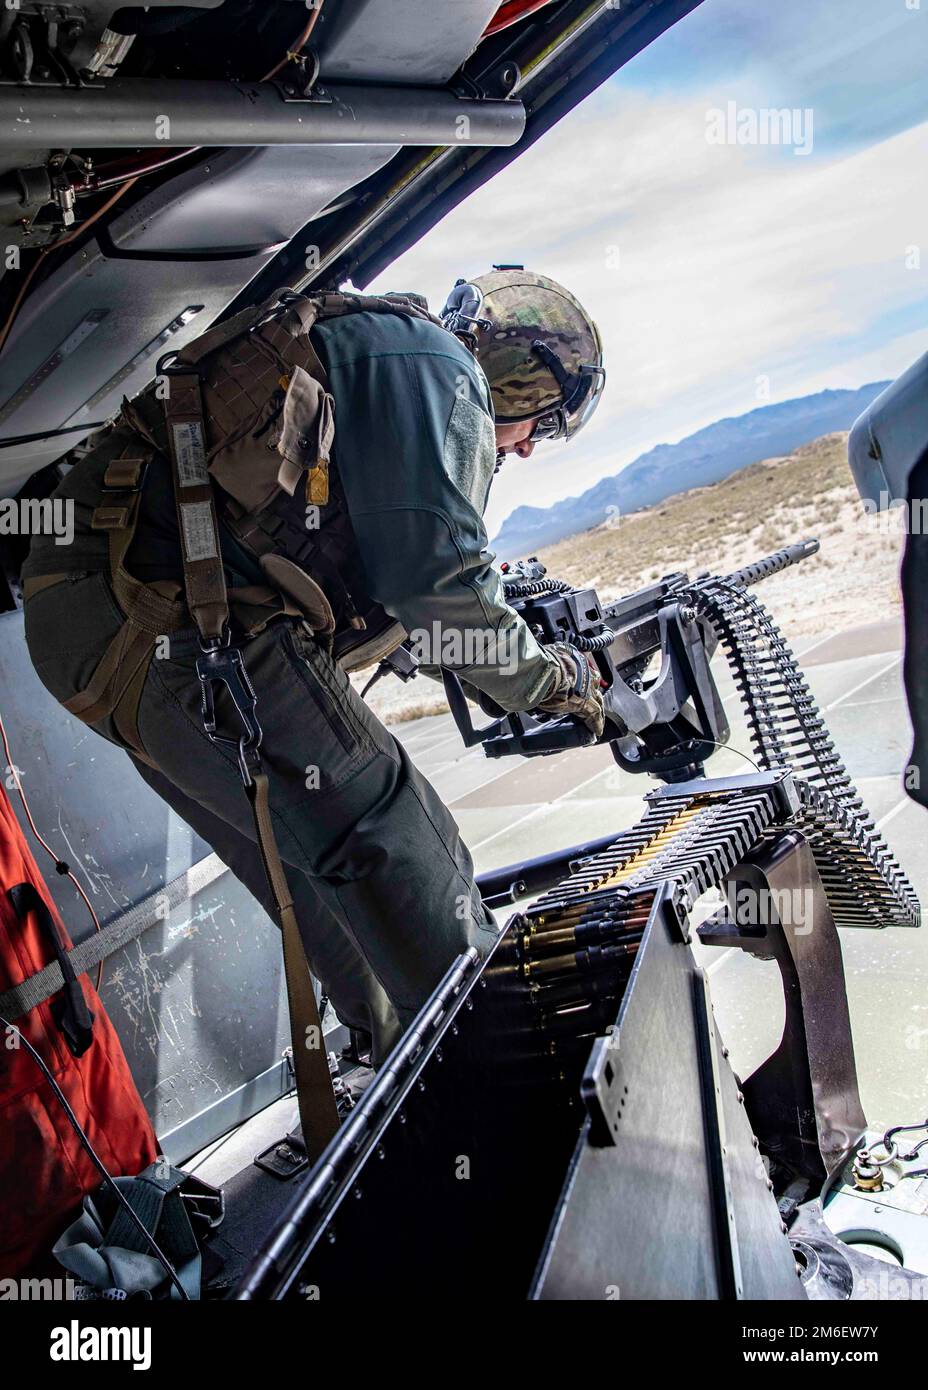 Senior Chief Naval Aircrewman (helicopter) Rabea Shaiboon flies during a gun exercise with Helicopter Sea Combat Squadron (HSC) 5 at Naval Air Station Fallon, April 26, 2022. Carrier Air Wing (CVW) 7 is the offensive air and strike component of Carrier Strike Group (CSG) 10 and the George H.W. Bush CSG. The squadrons of CVW-7 are Strike Fighter Squadron (VFA) 143; VFA-103; VFA-86; VFA-136; Electronic Attack Squadron (VAQ) 140; Carrier Airborne Early Warning Squadron (VAW) 121; HSC-5; and Helicopter Maritime Strike Squadron (HSM) 46. Stock Photo